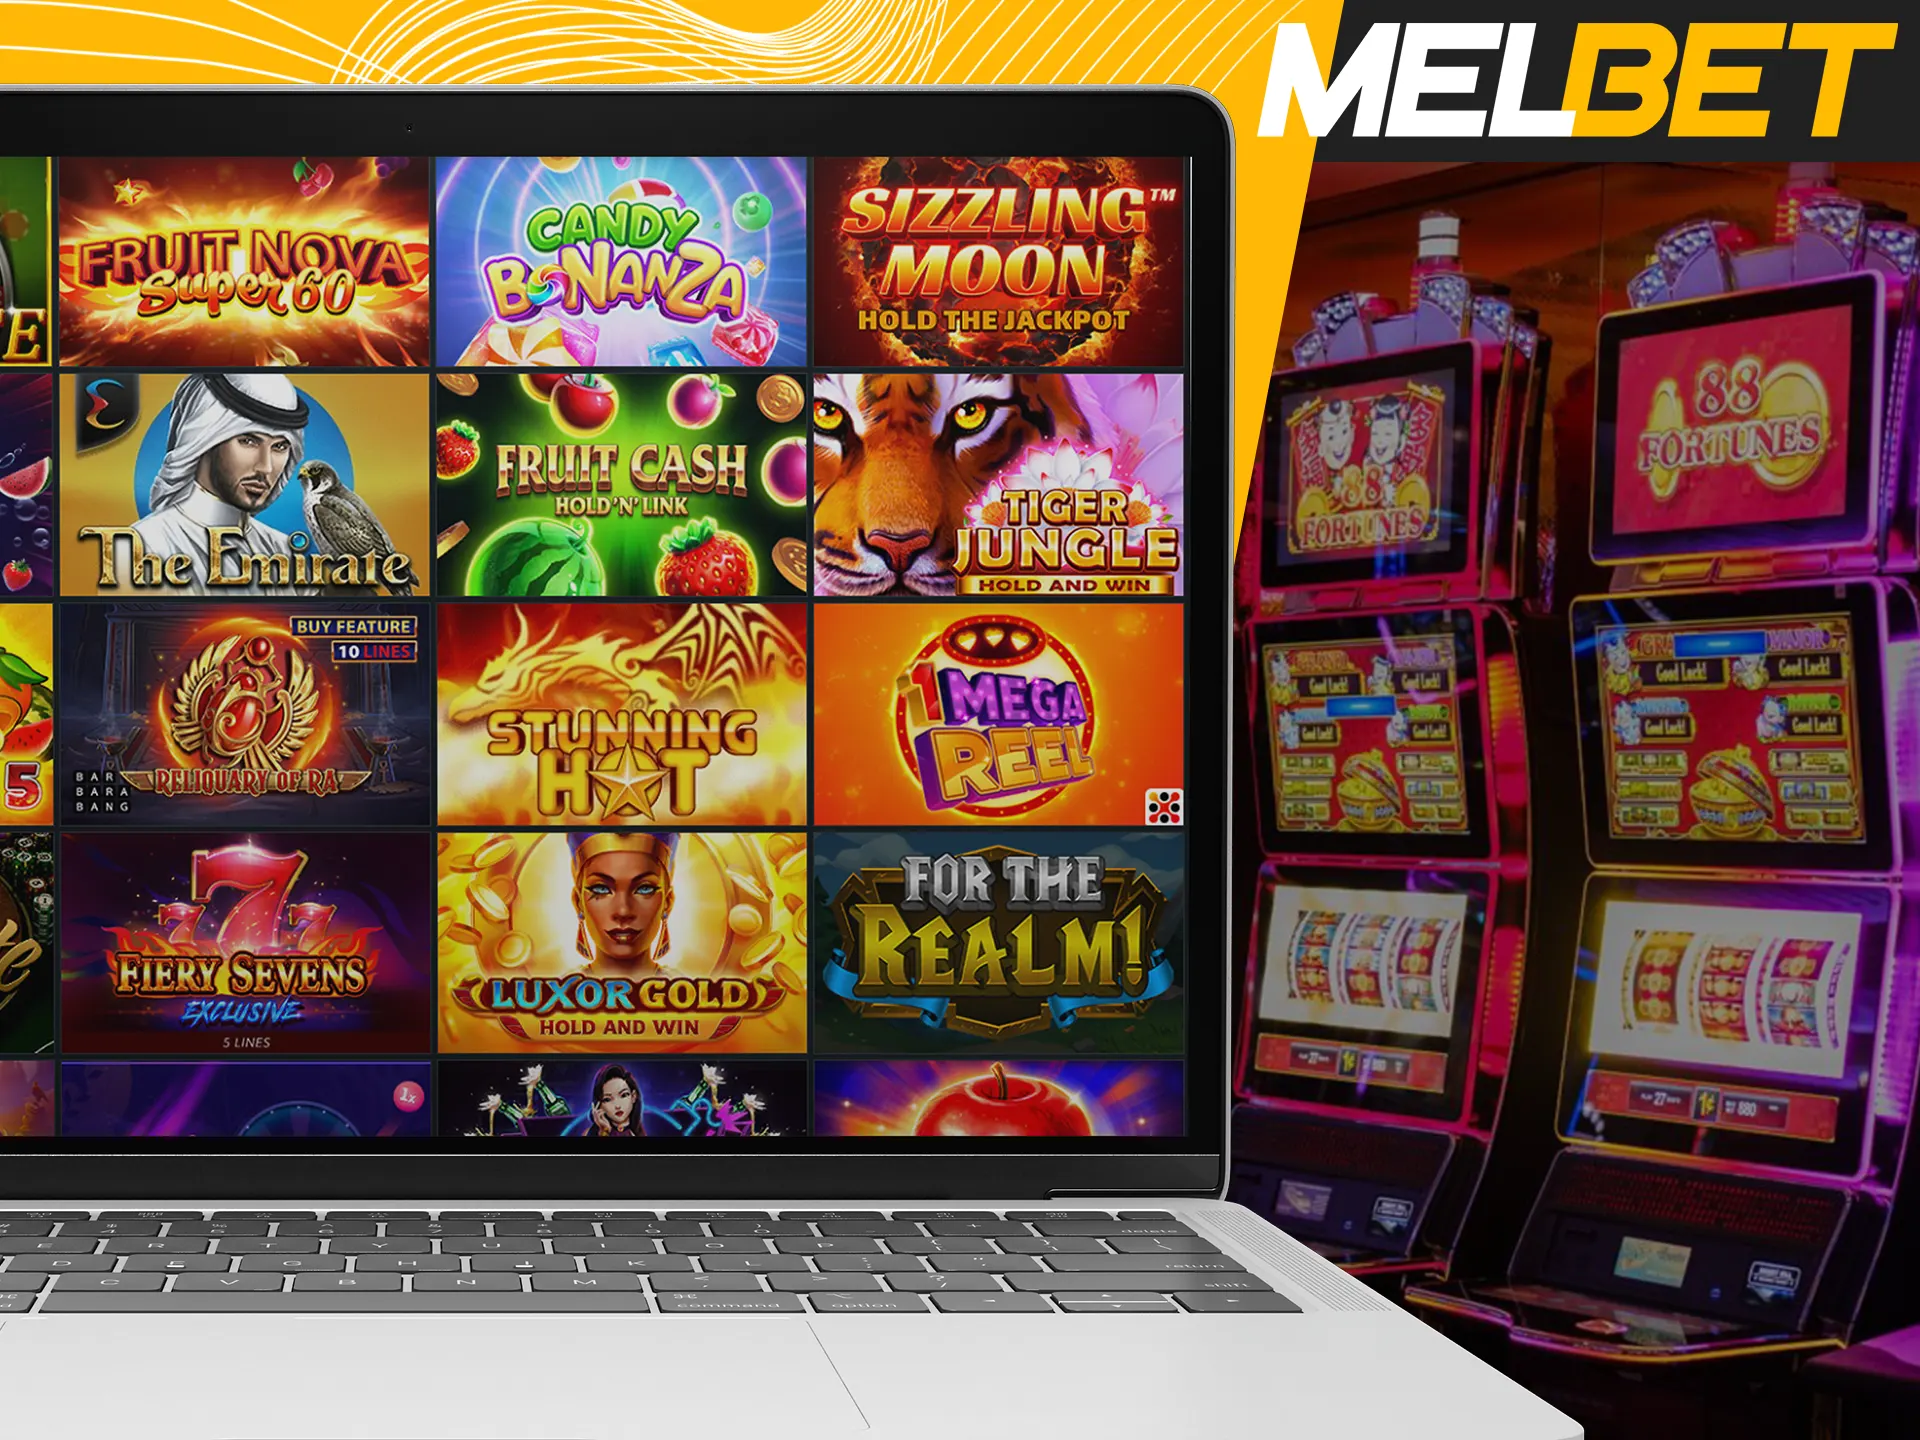 Spin Melbet slots and win money.